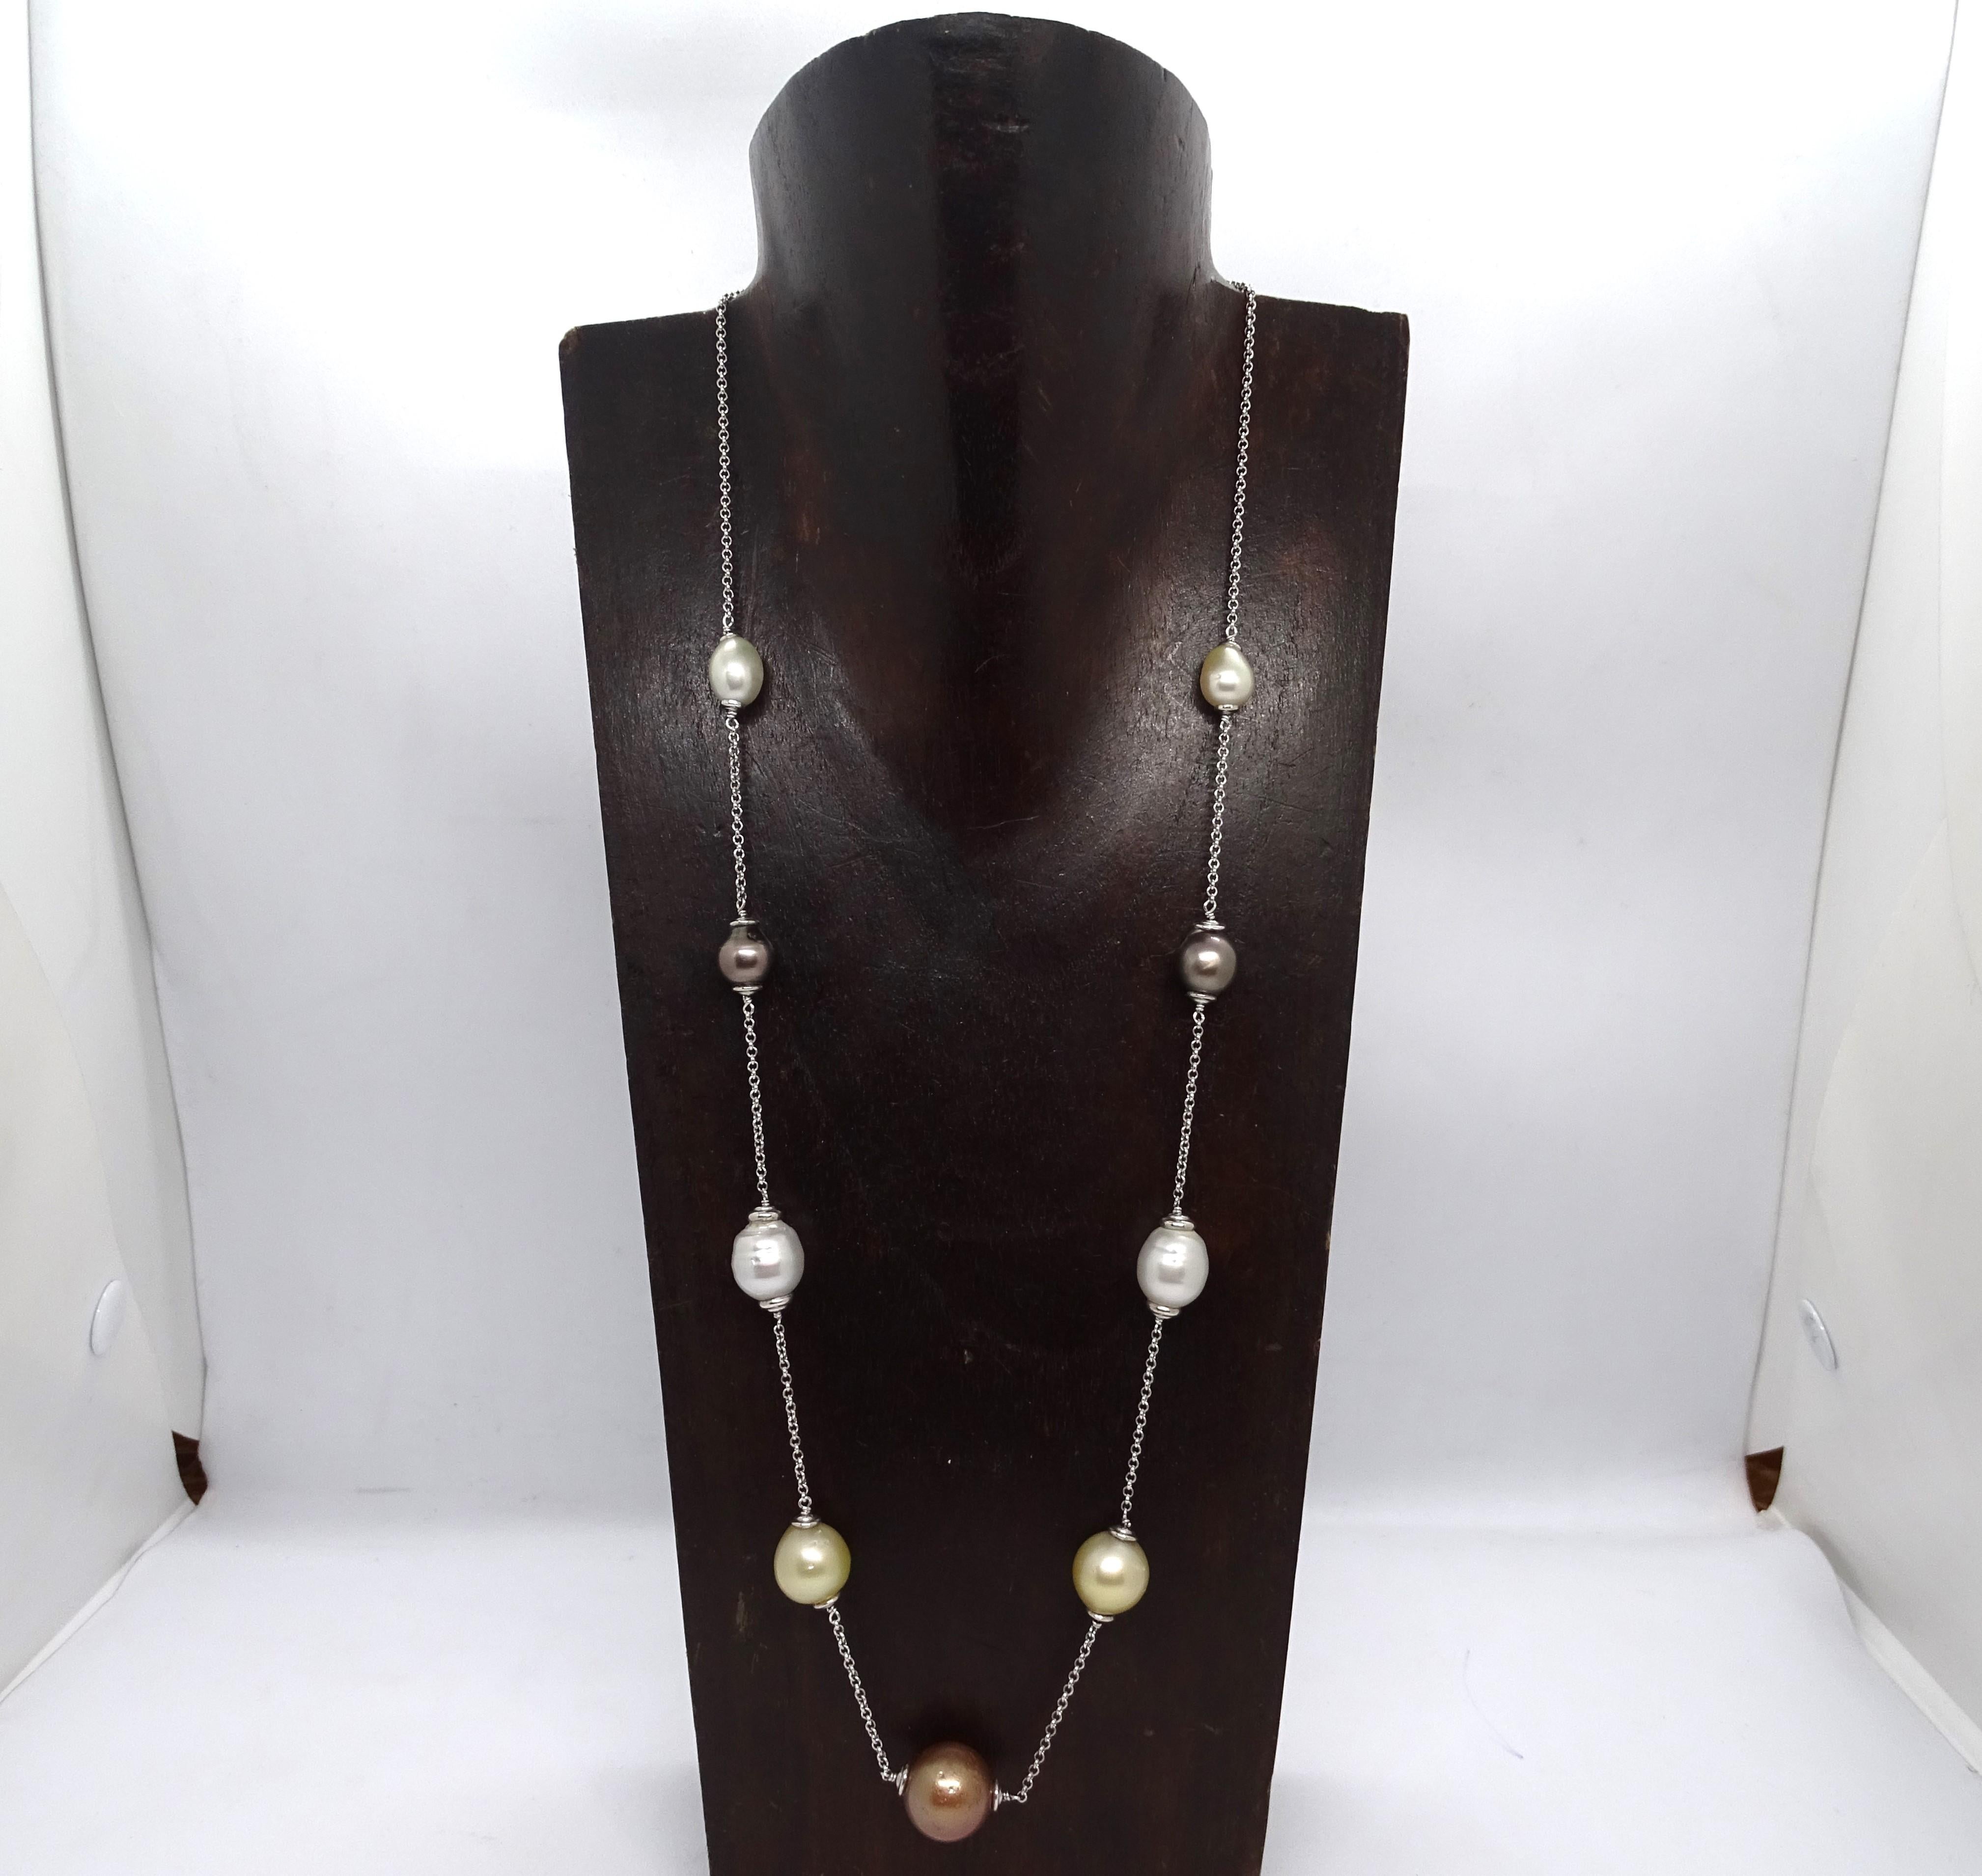 Women's Australian, golden, tahitian and chocolate pearl necklace - white gold chain